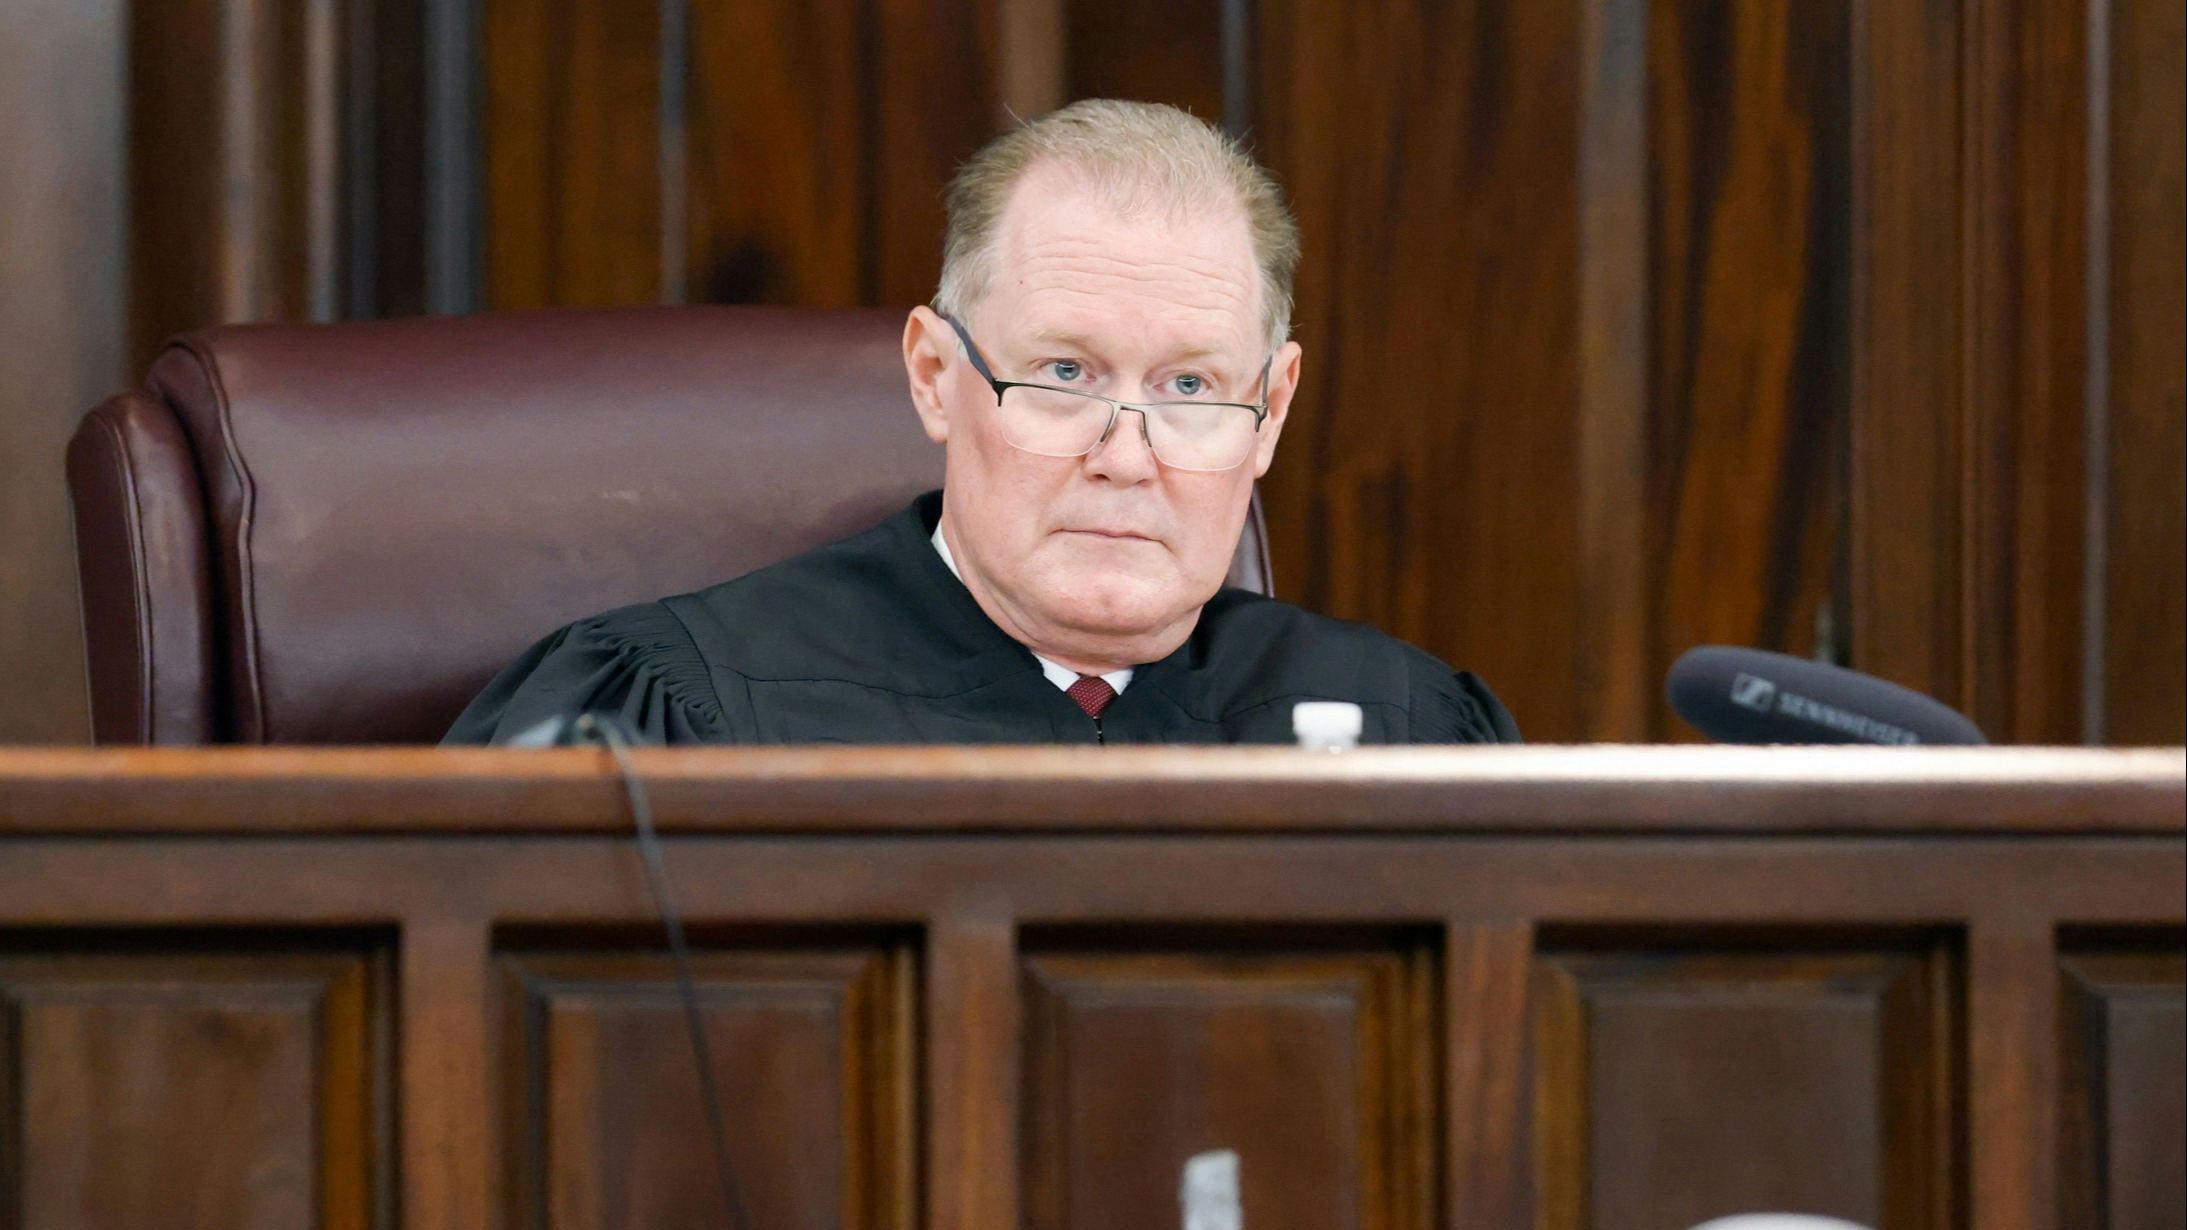 Judge Timothy Walmsley presides over the jury selection process in the trial of the men charged with killing Ahmaud Arbery at the Glynn County Superior Court, on October 27, 2021 in Brunswick, Georgia.